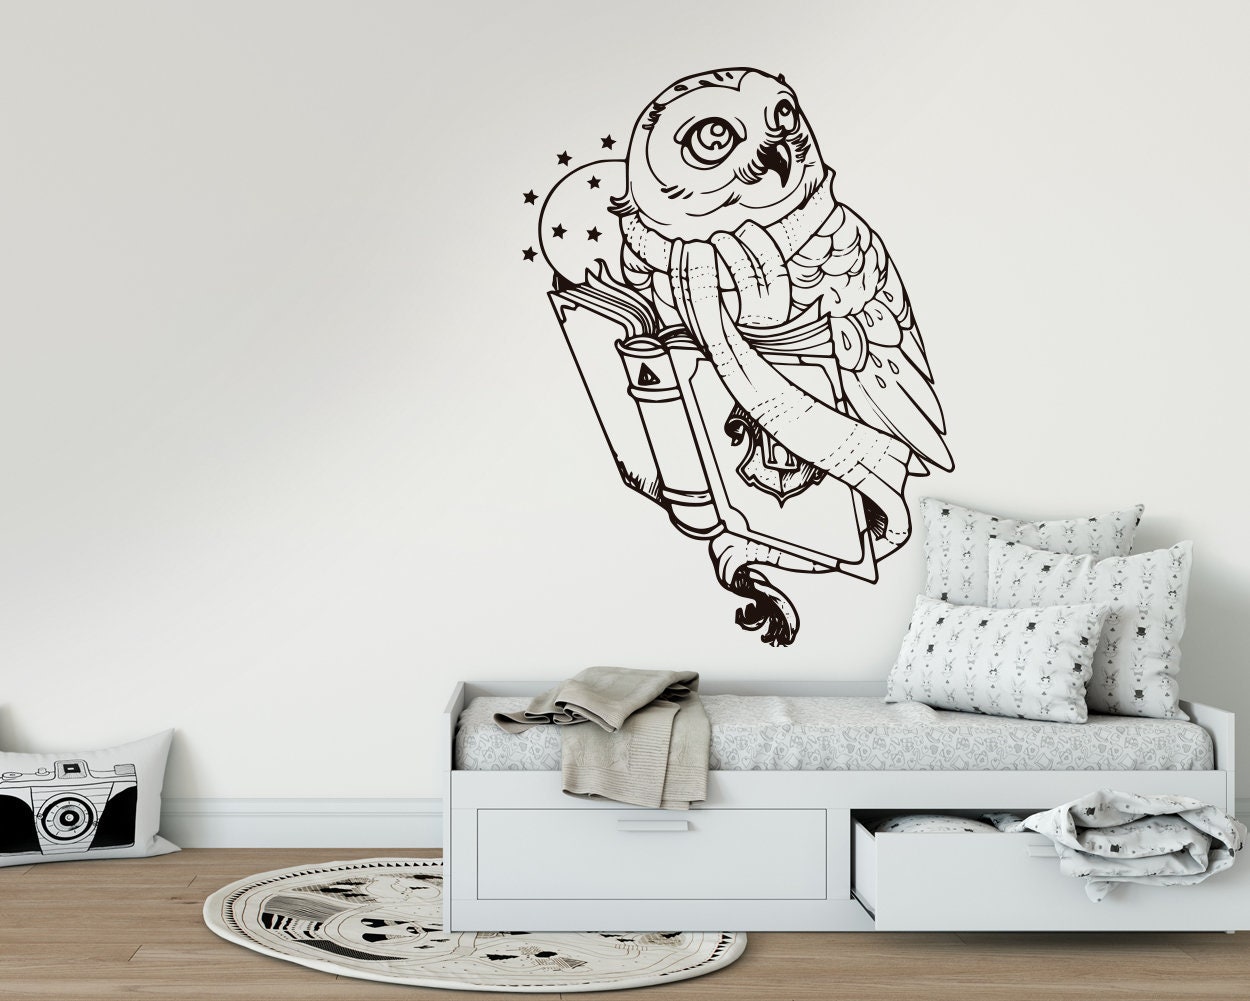 Harry Pottery The Chamberharry Potter Owl Wall Sticker - Waterproof Pvc  Vinyl Decal For Home Decor